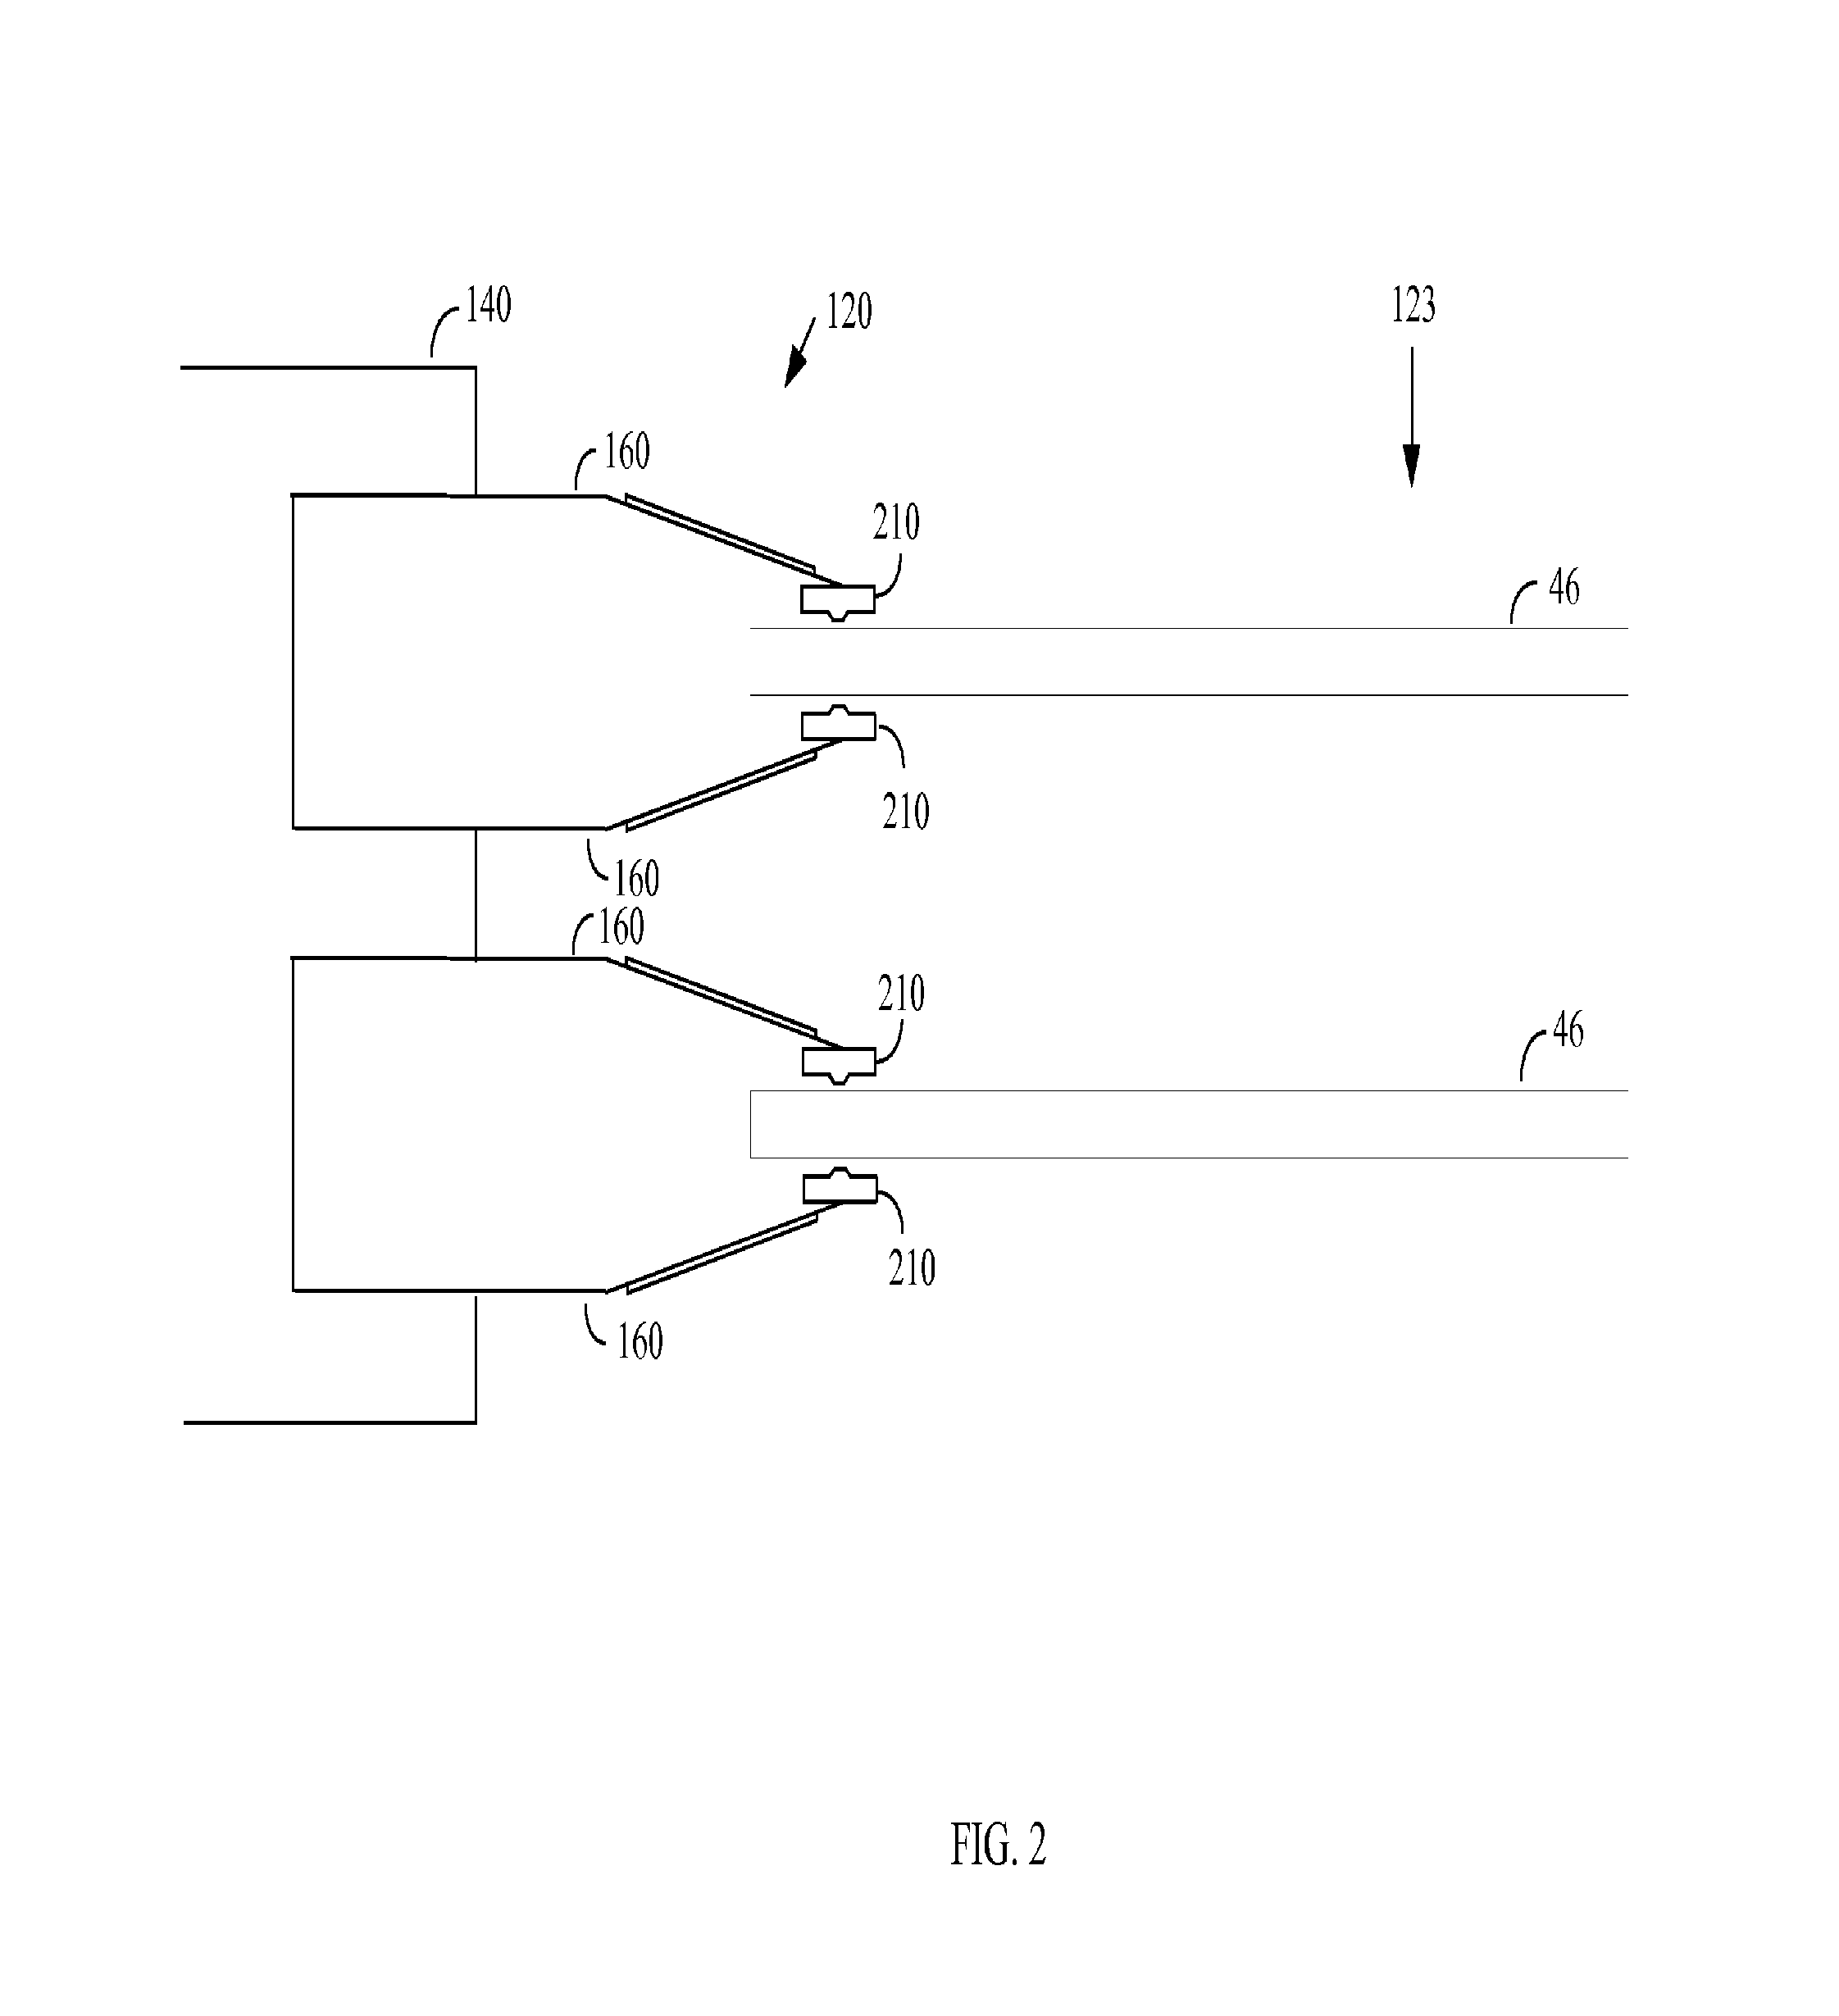 Systems and methods for improving sequential data rate performance using sorted data zones for butterfly format